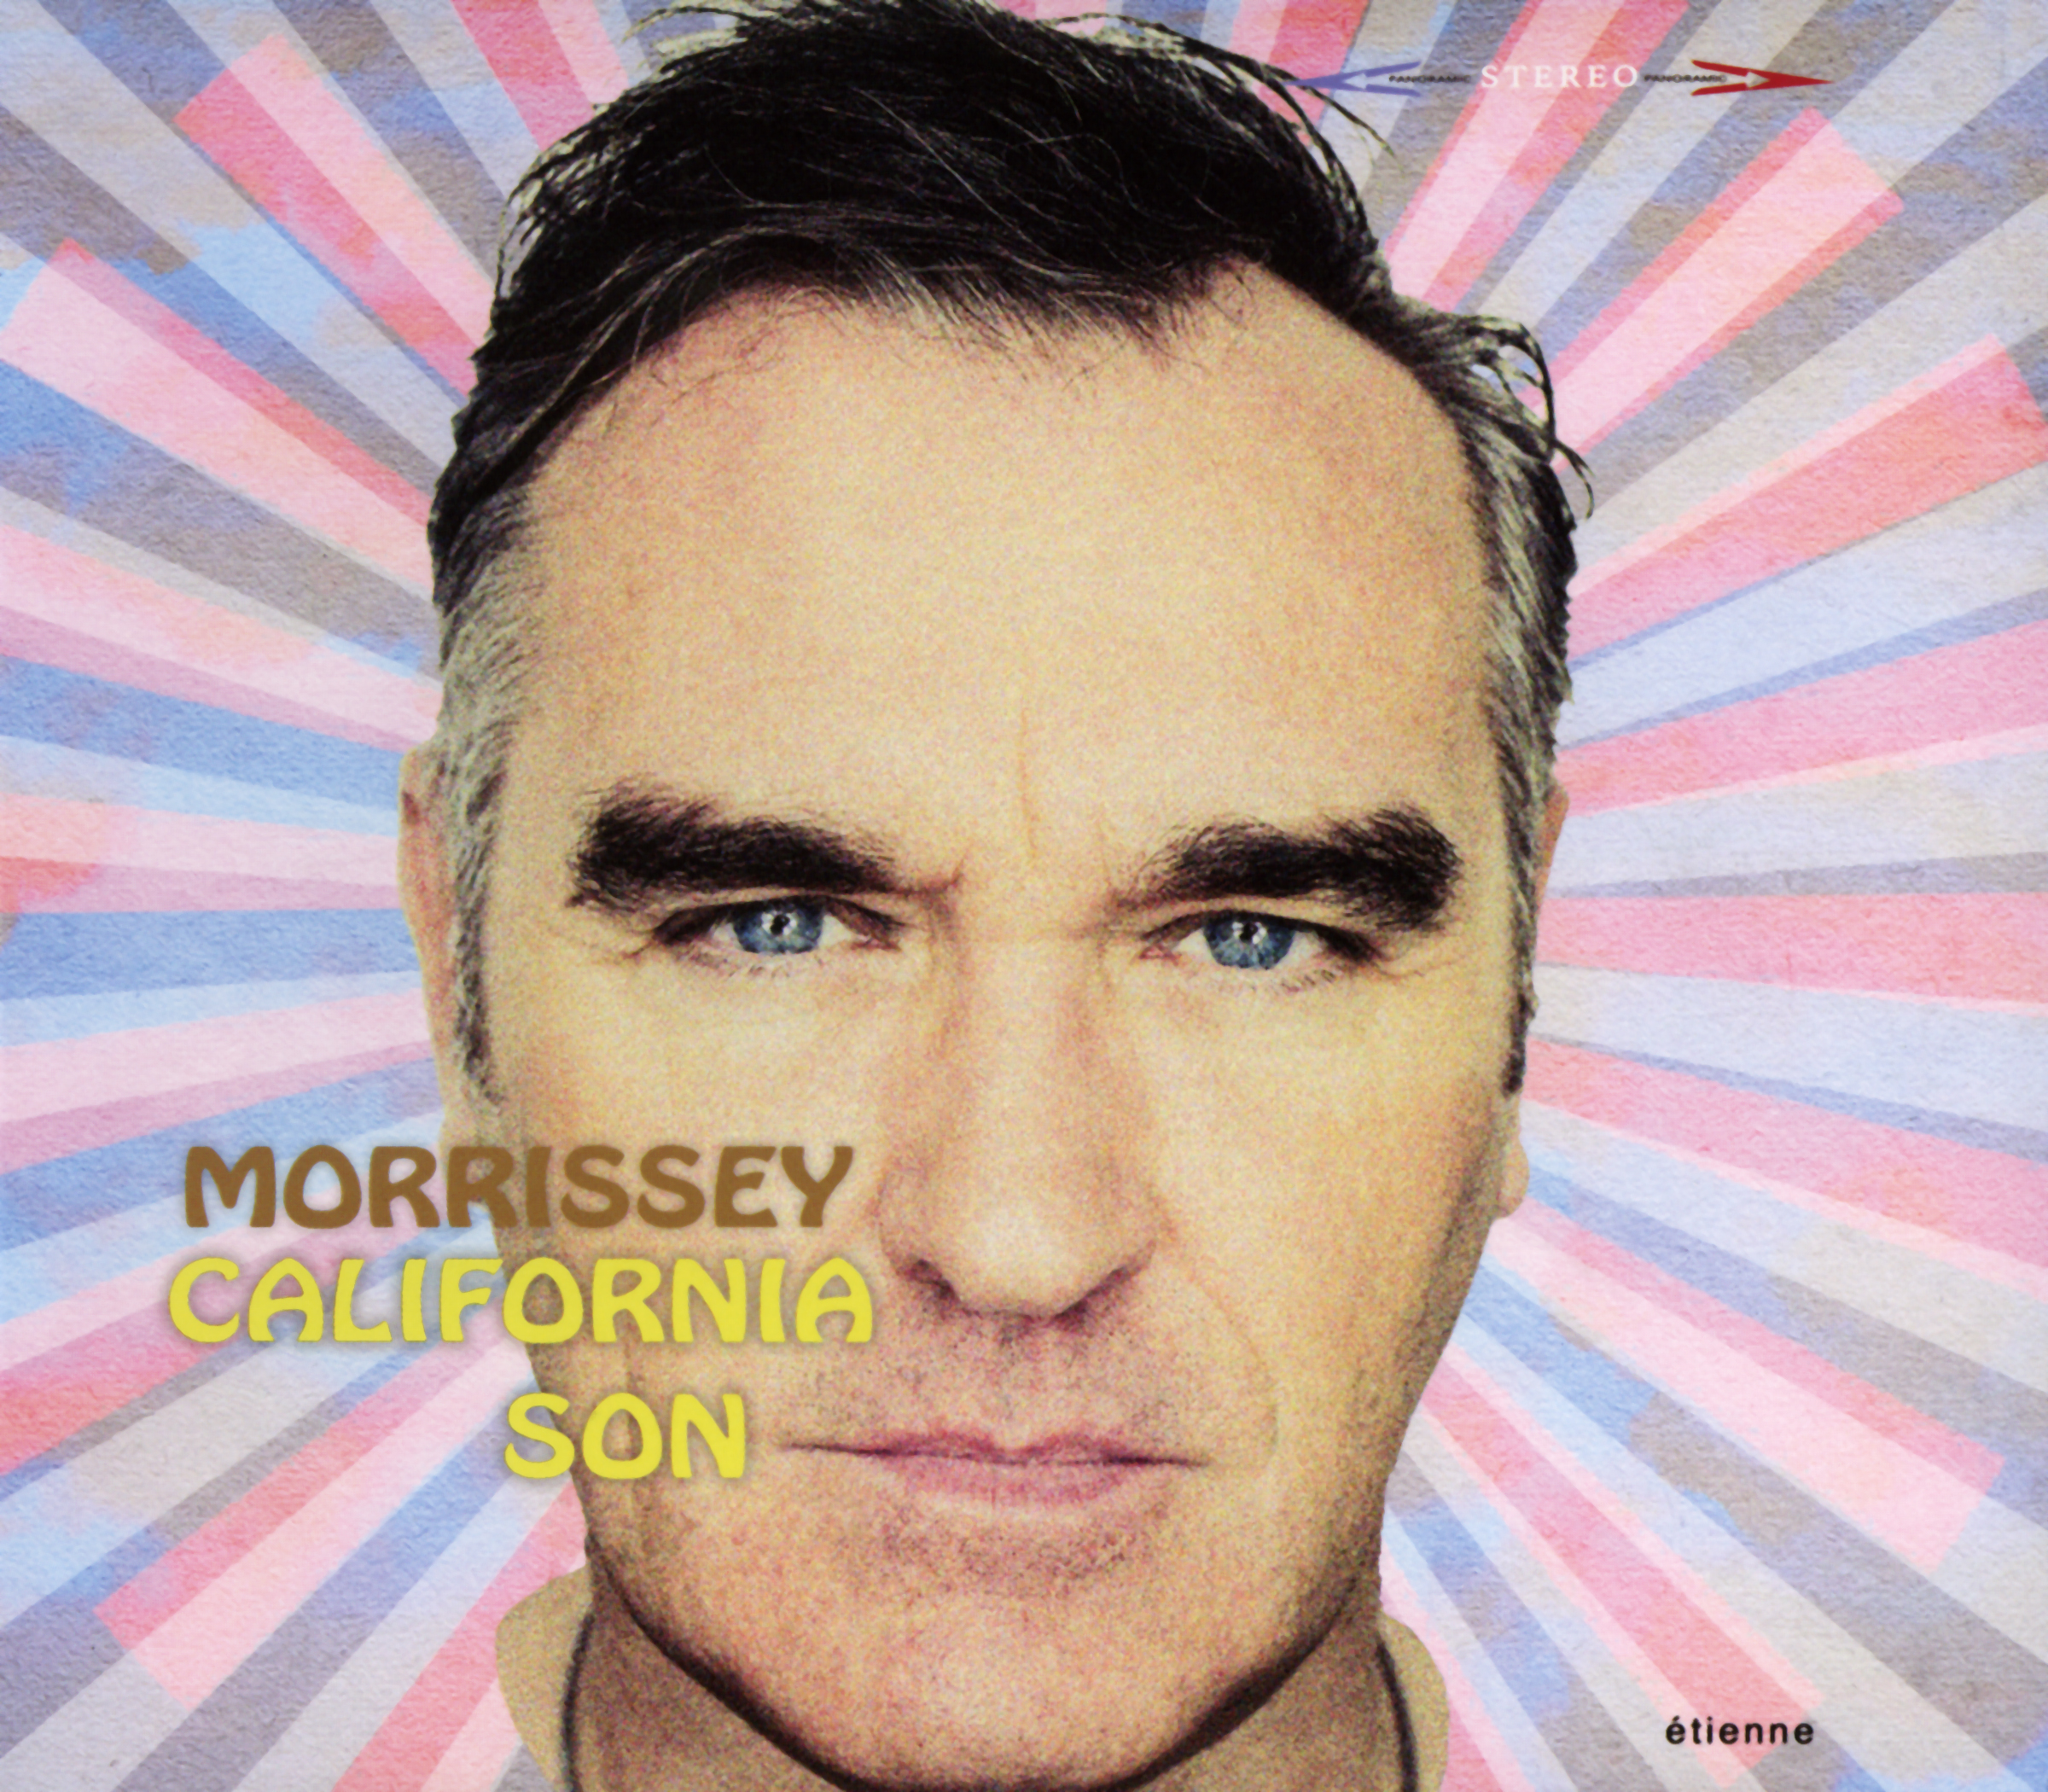 2019-05-24 'California Son' By Morrissey [U.S. Étienne Records Pressing] [Gatefold Cover]